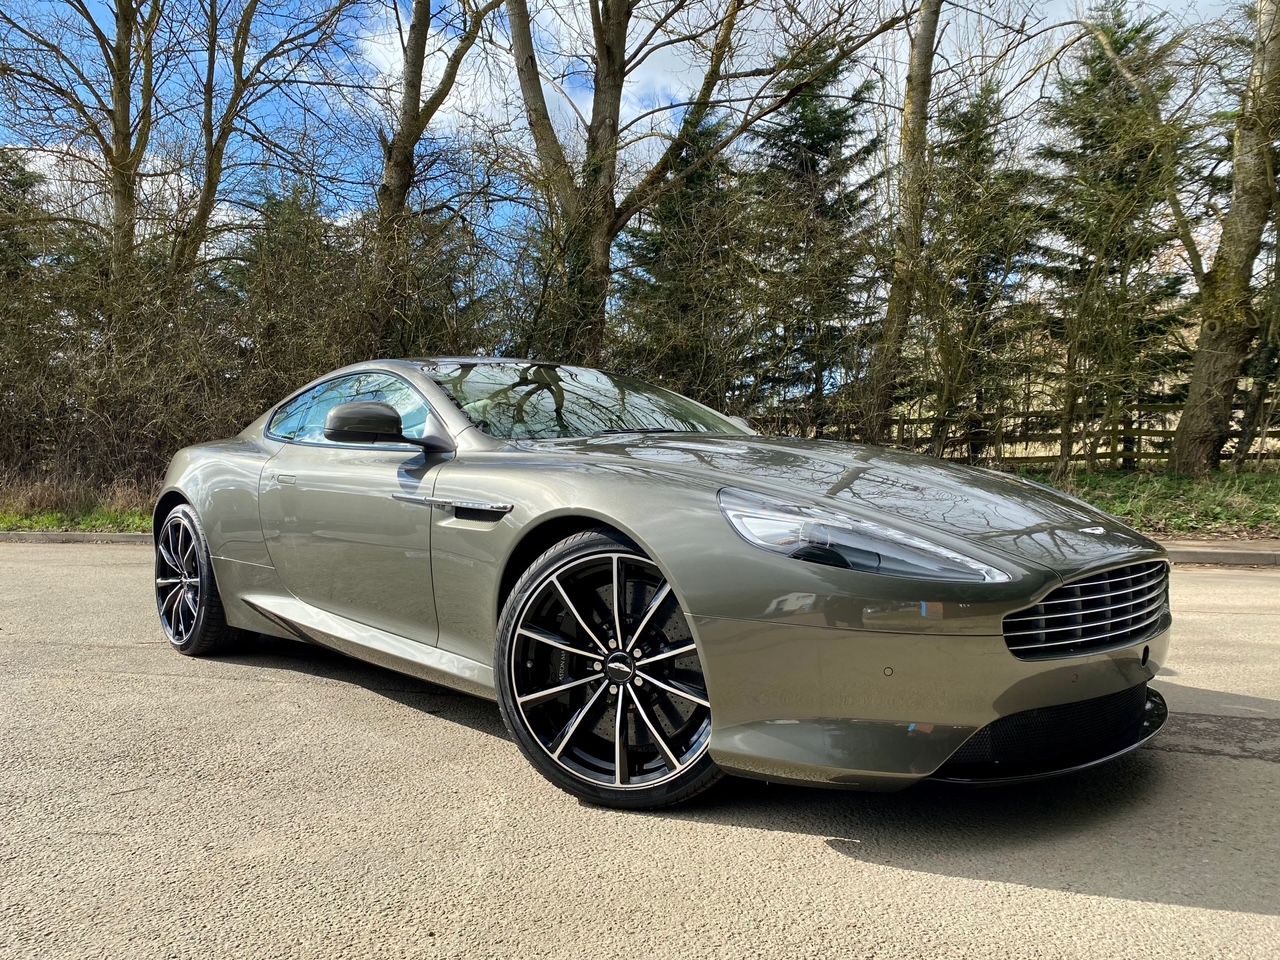 The Luxurious Power Of The 2016 Aston Martin DB9 GT